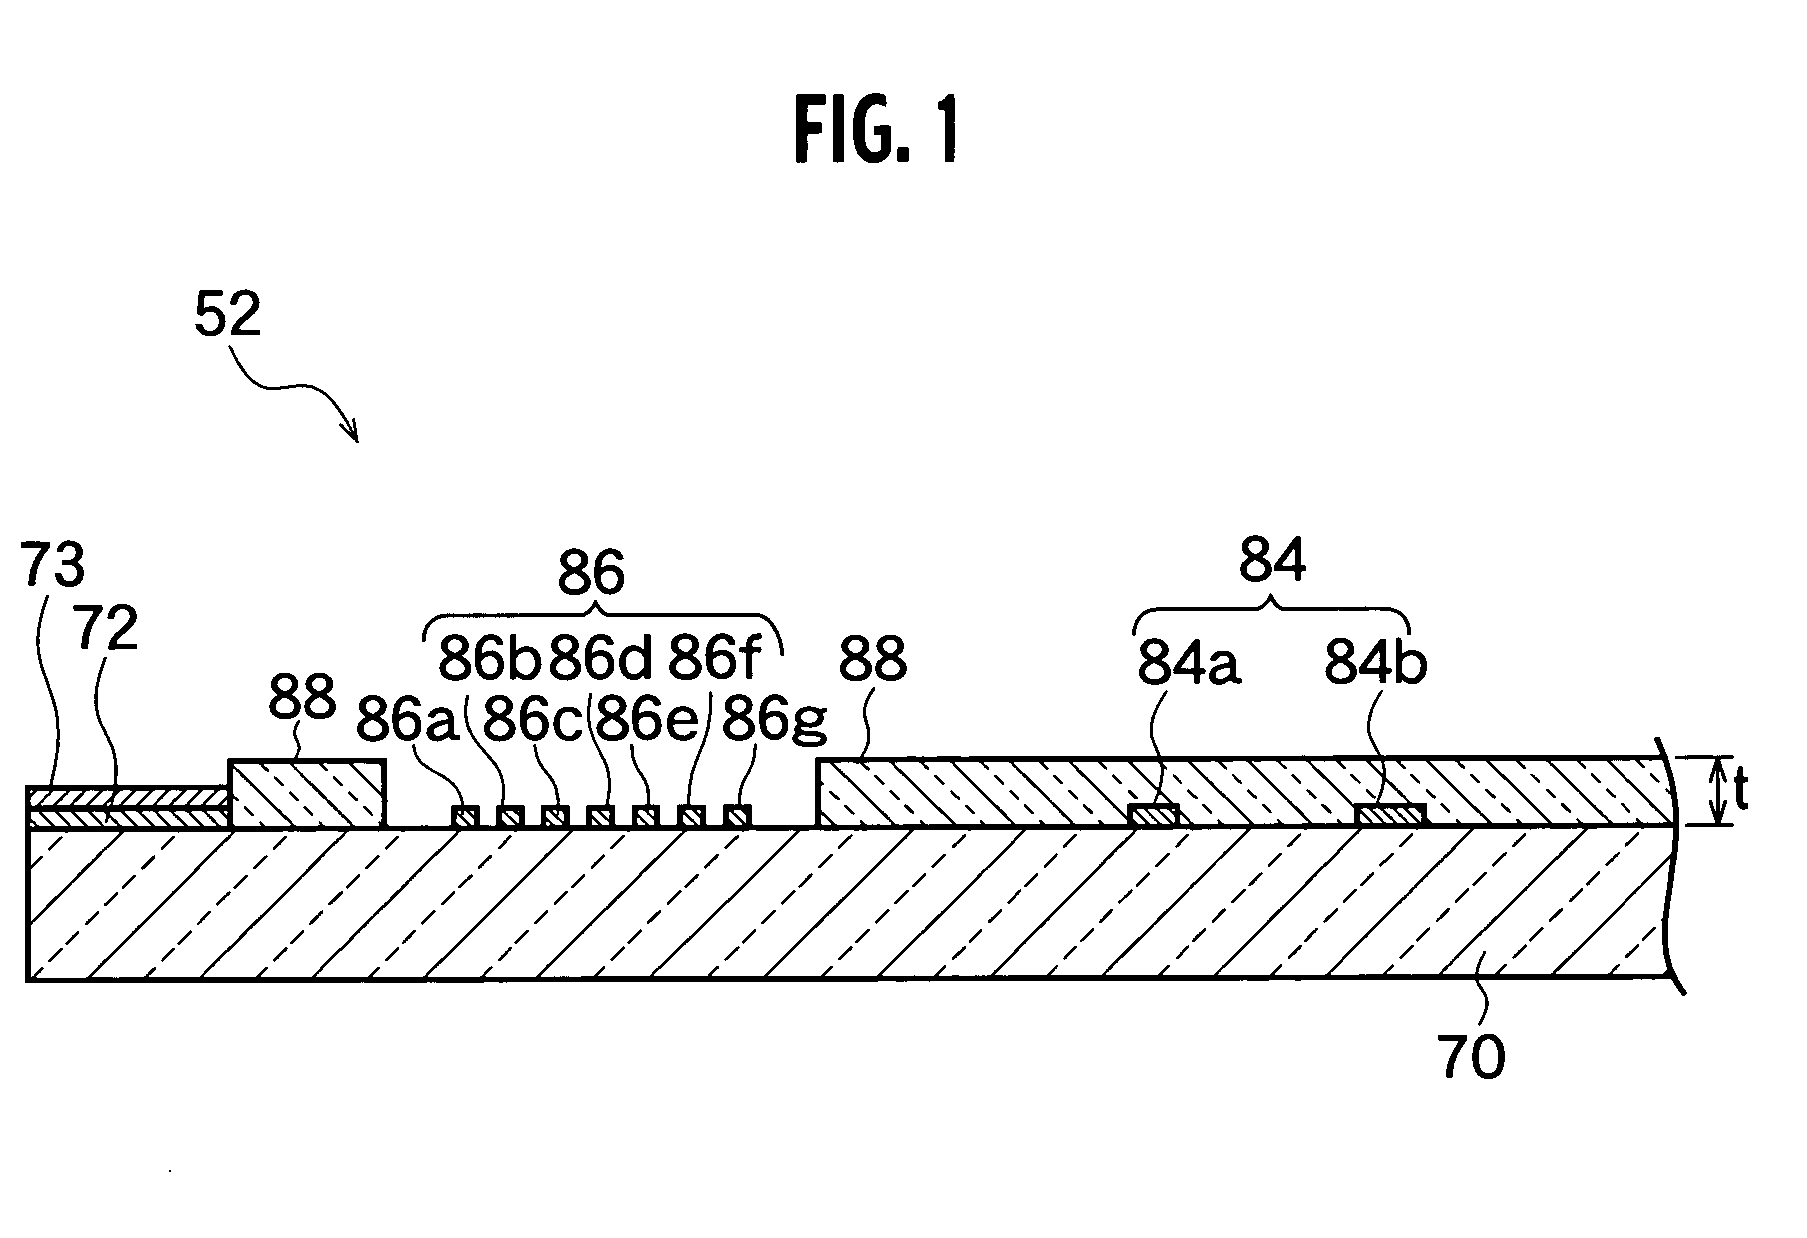 Photomask, method for fabricating a pattern and method for manufacturing a semiconductor device